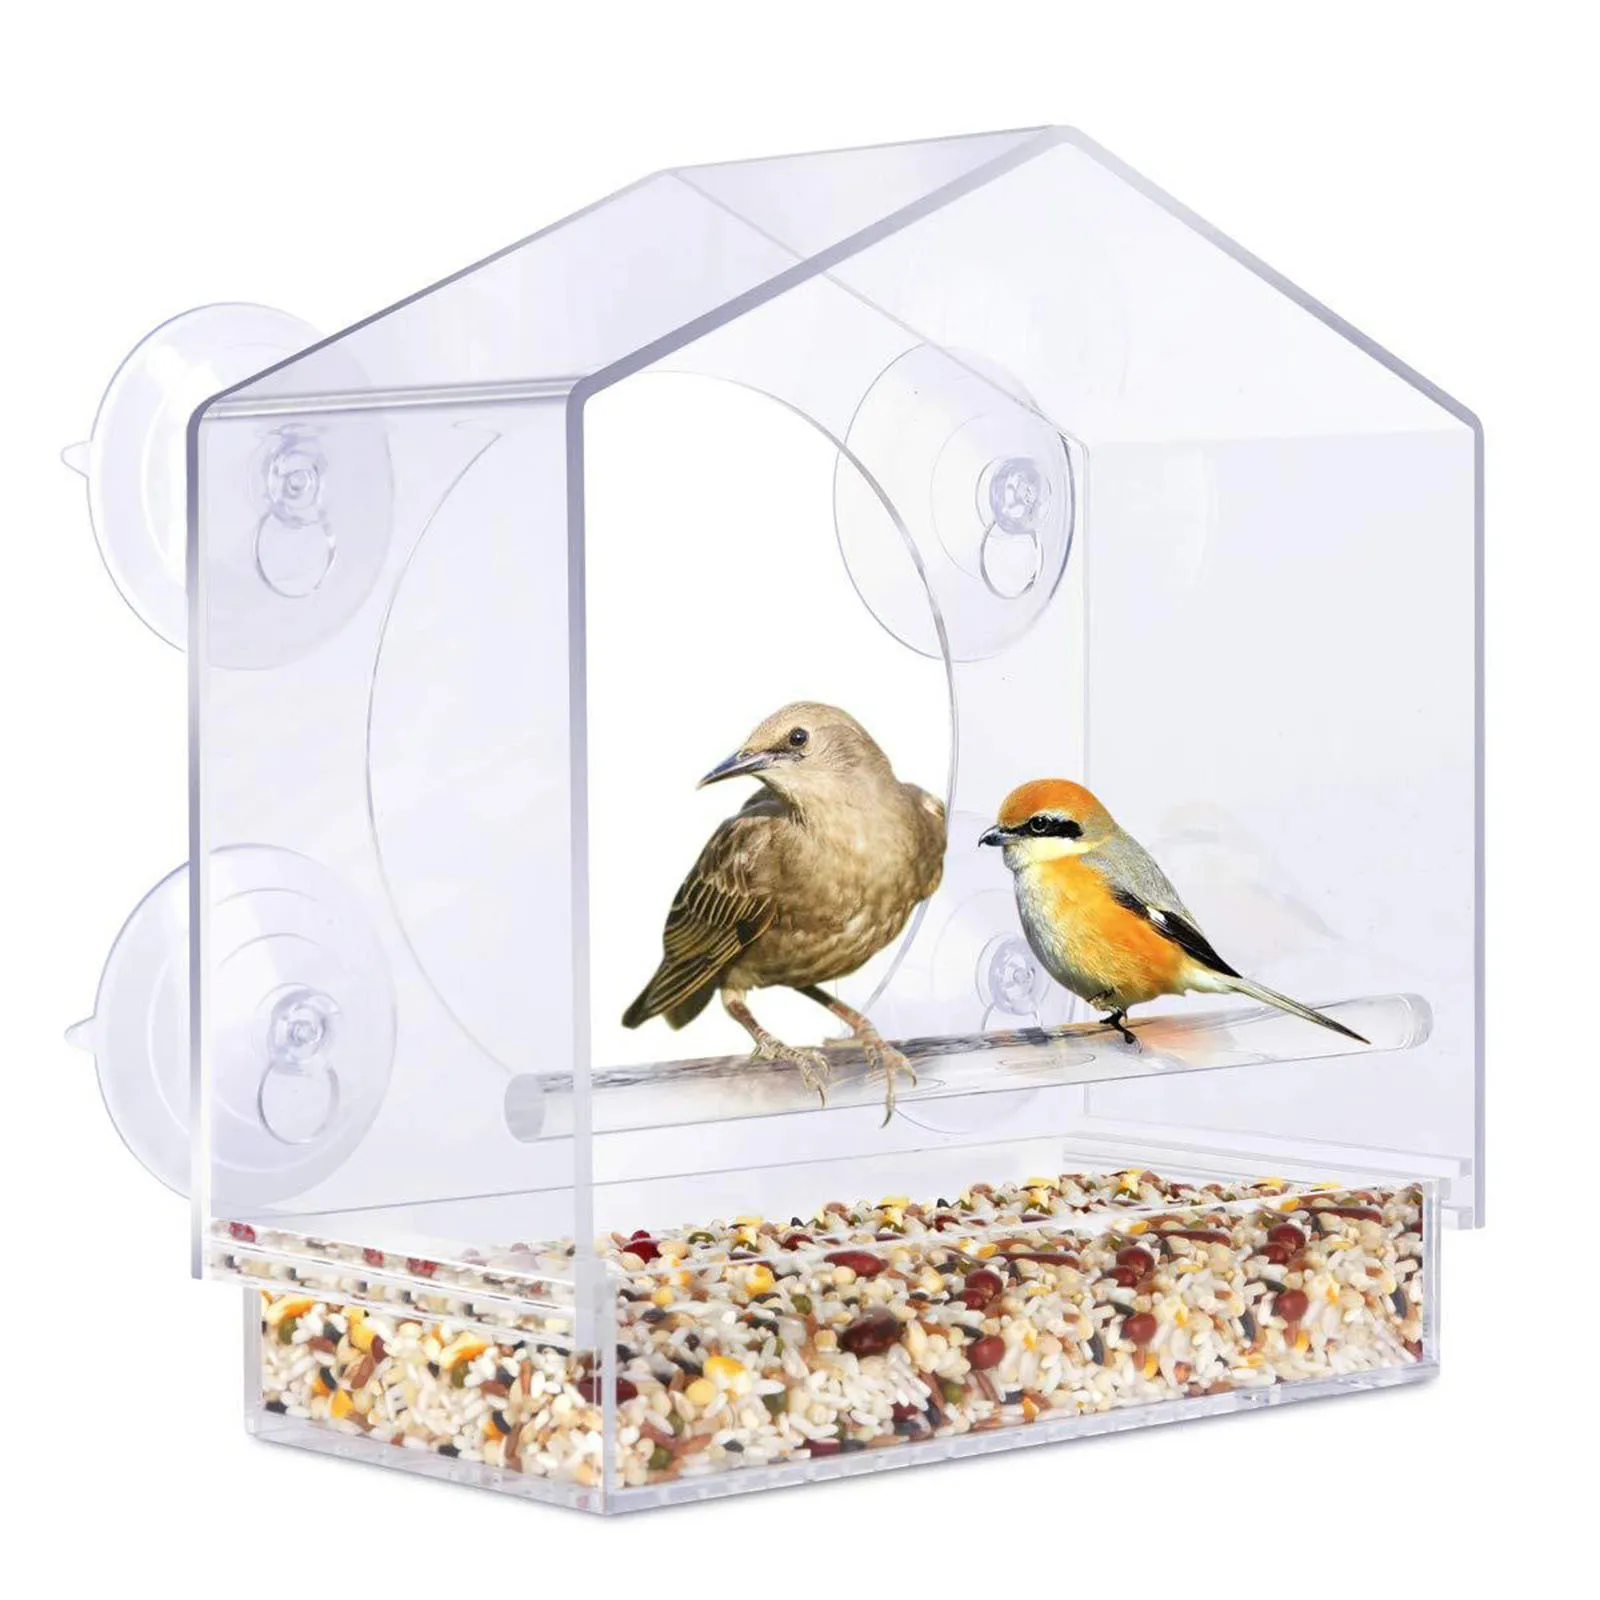 Acrylic Window Suction Cup bowls and bowls Birdhouse Villa bird feeder cage Bird feeder Clear plates and bowls set tableware